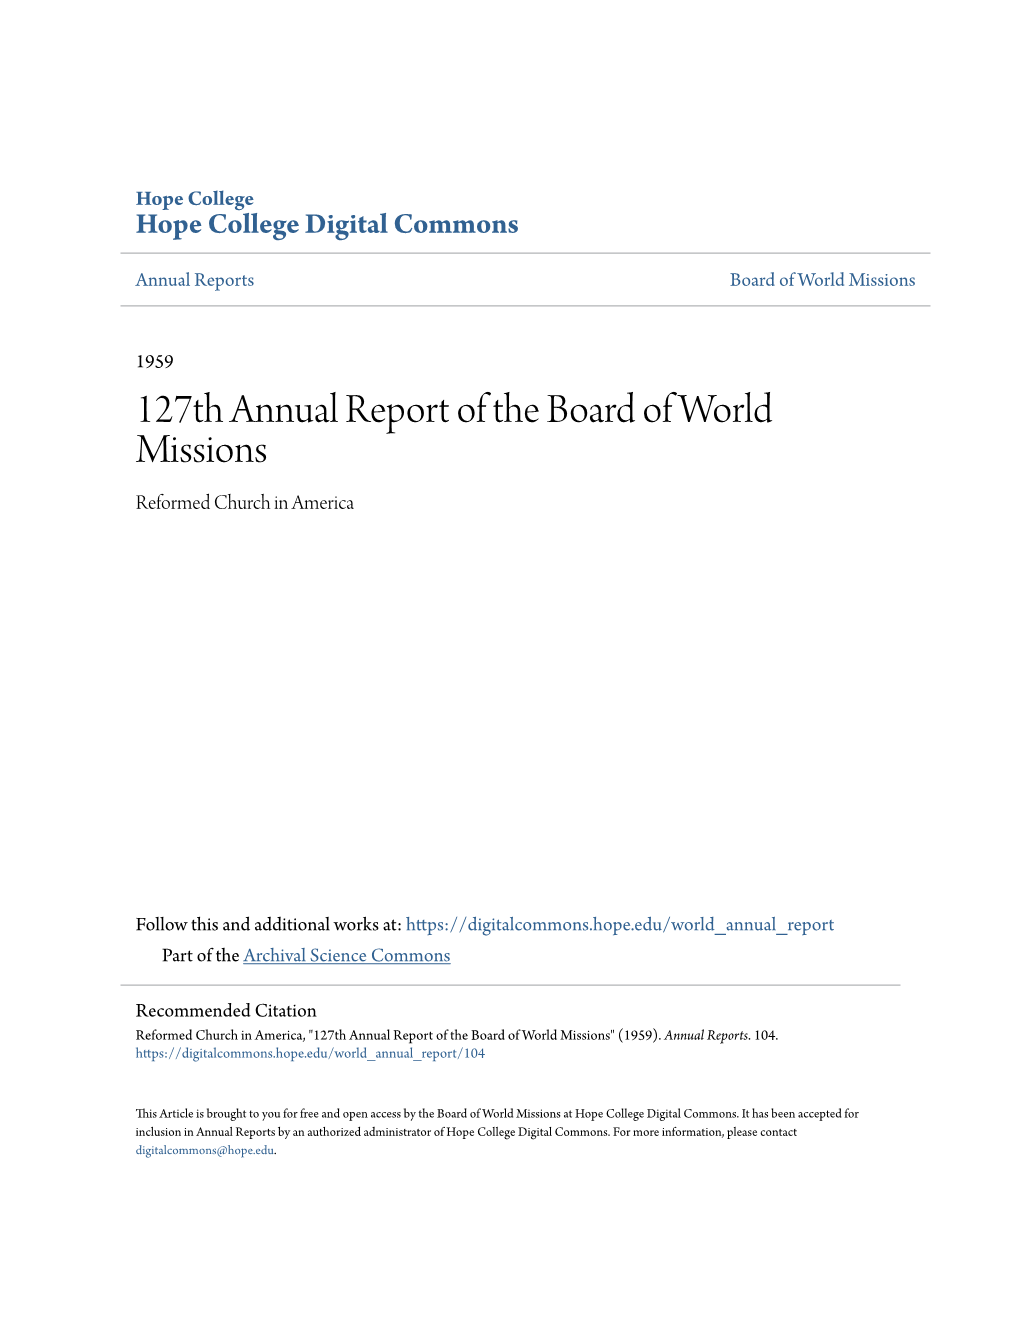 127Th Annual Report of the Board of World Missions Reformed Church in America